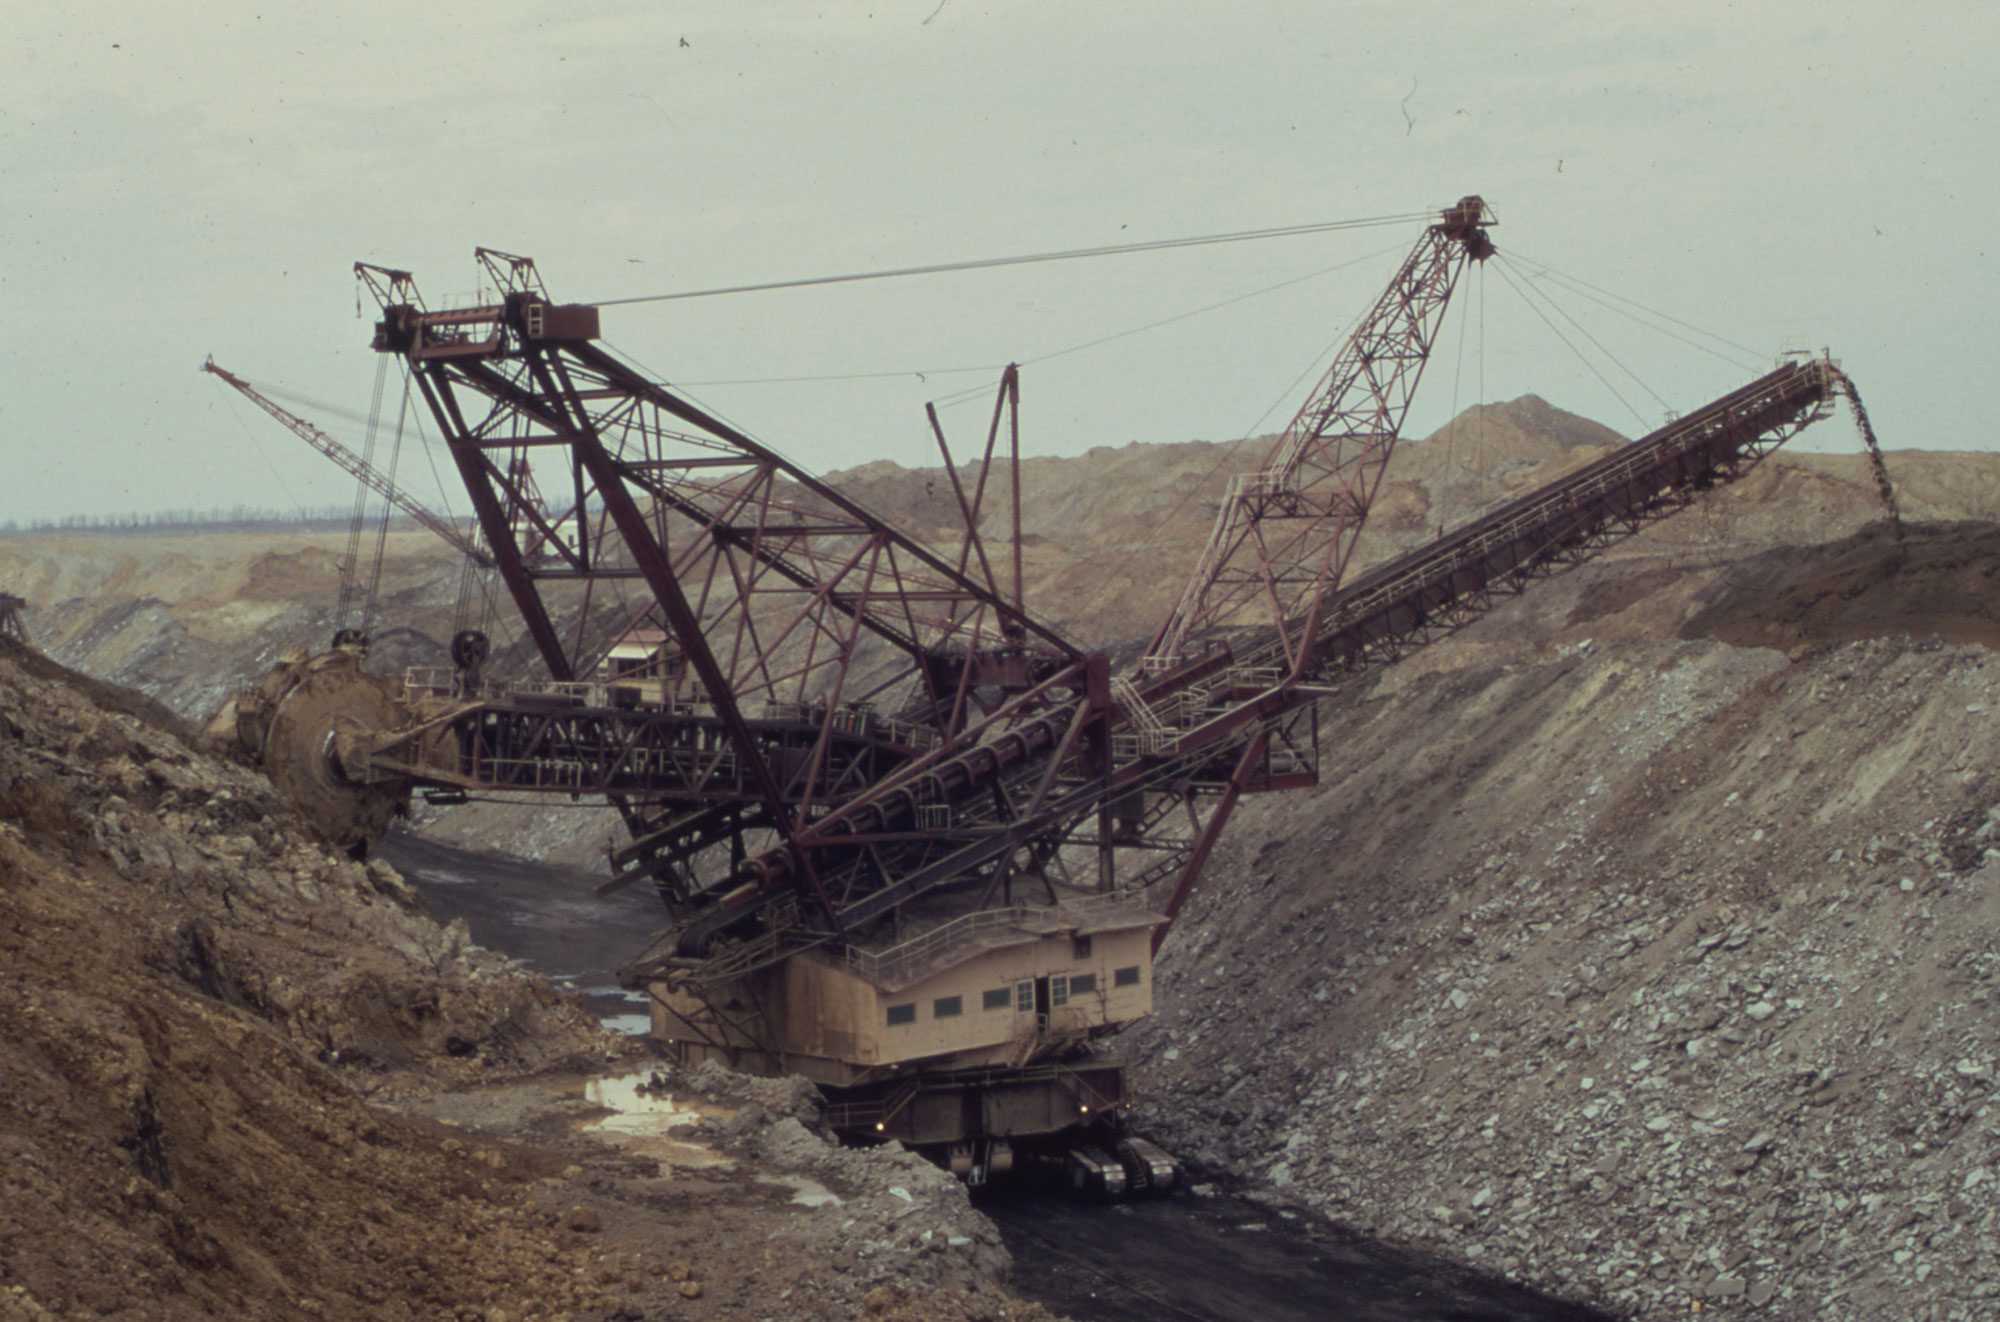 Photograph of a strip mine in Fulton County, Illinois, 1972. The photo shows a bucket wheel excavator in a trench. On the back of the excavator, a wheel with bucket spokes digs into a bank. On the front of the excavator, a conveyer empties sediment at the other edge of the trench. 